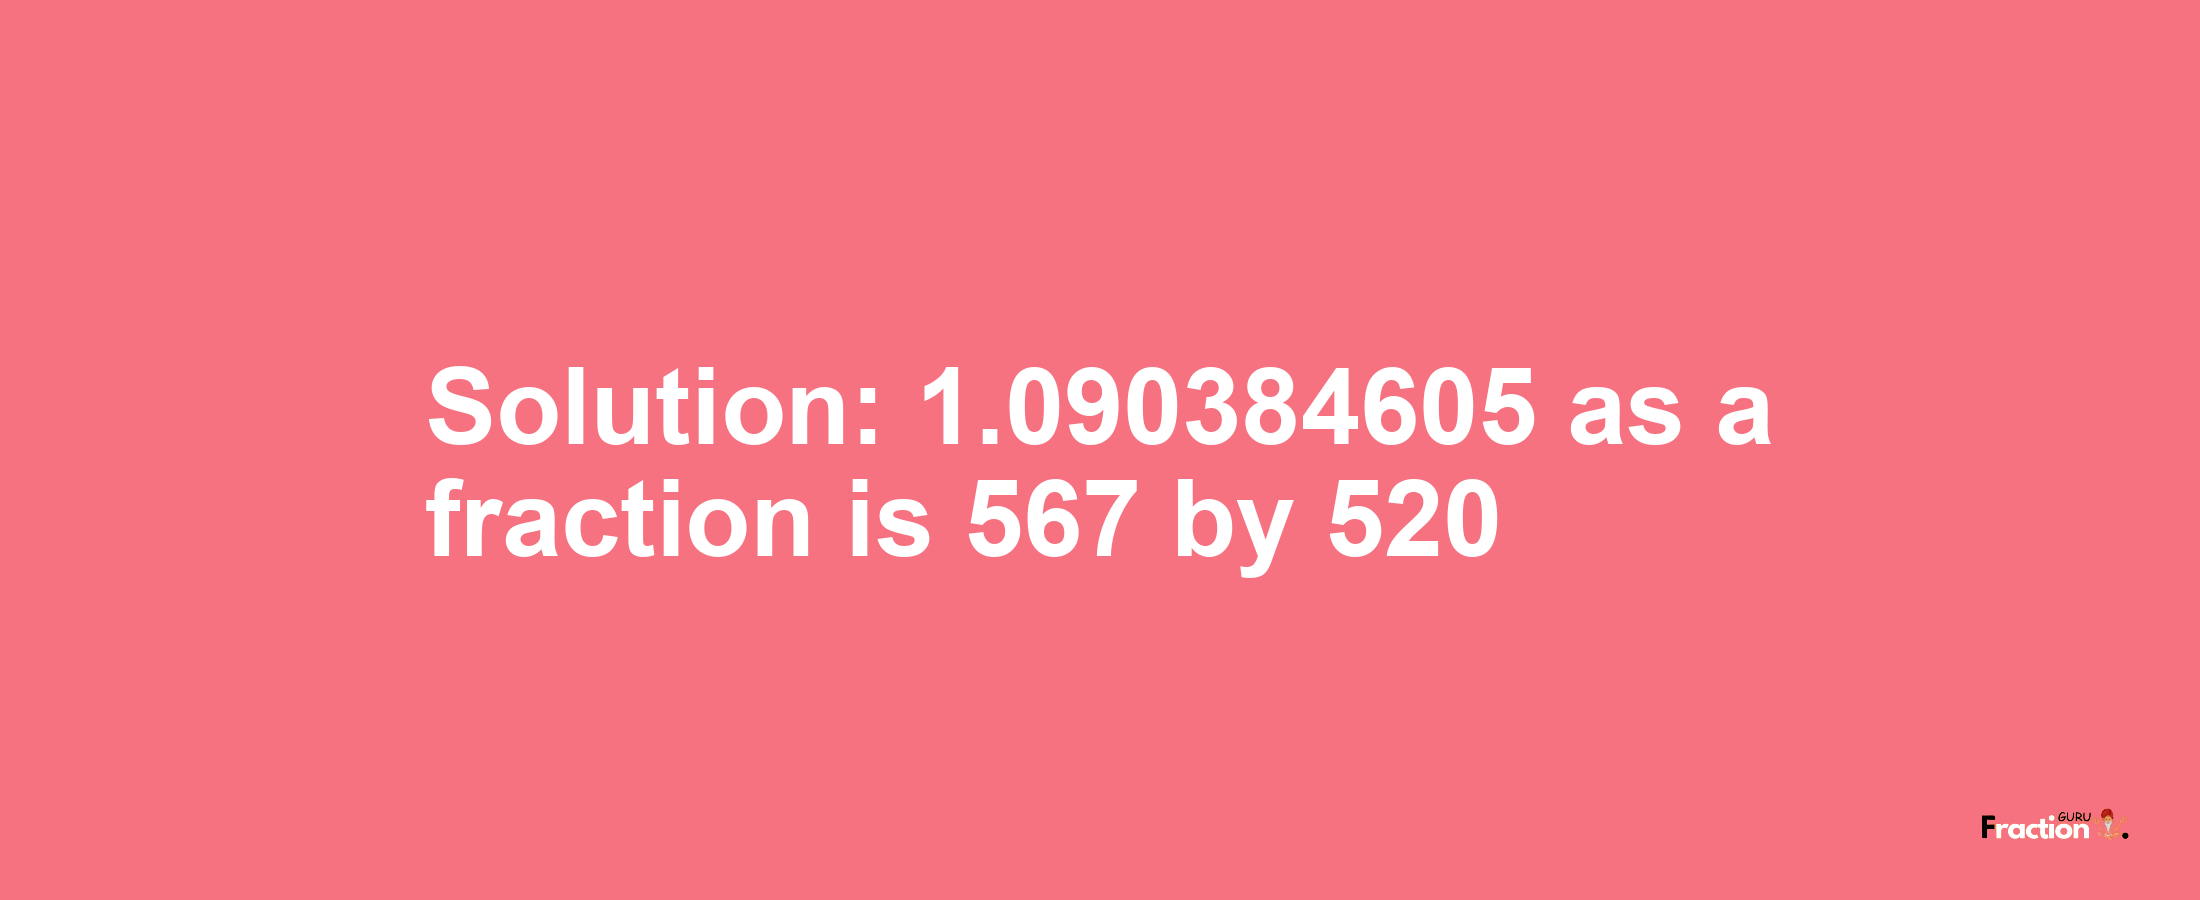 Solution:1.090384605 as a fraction is 567/520